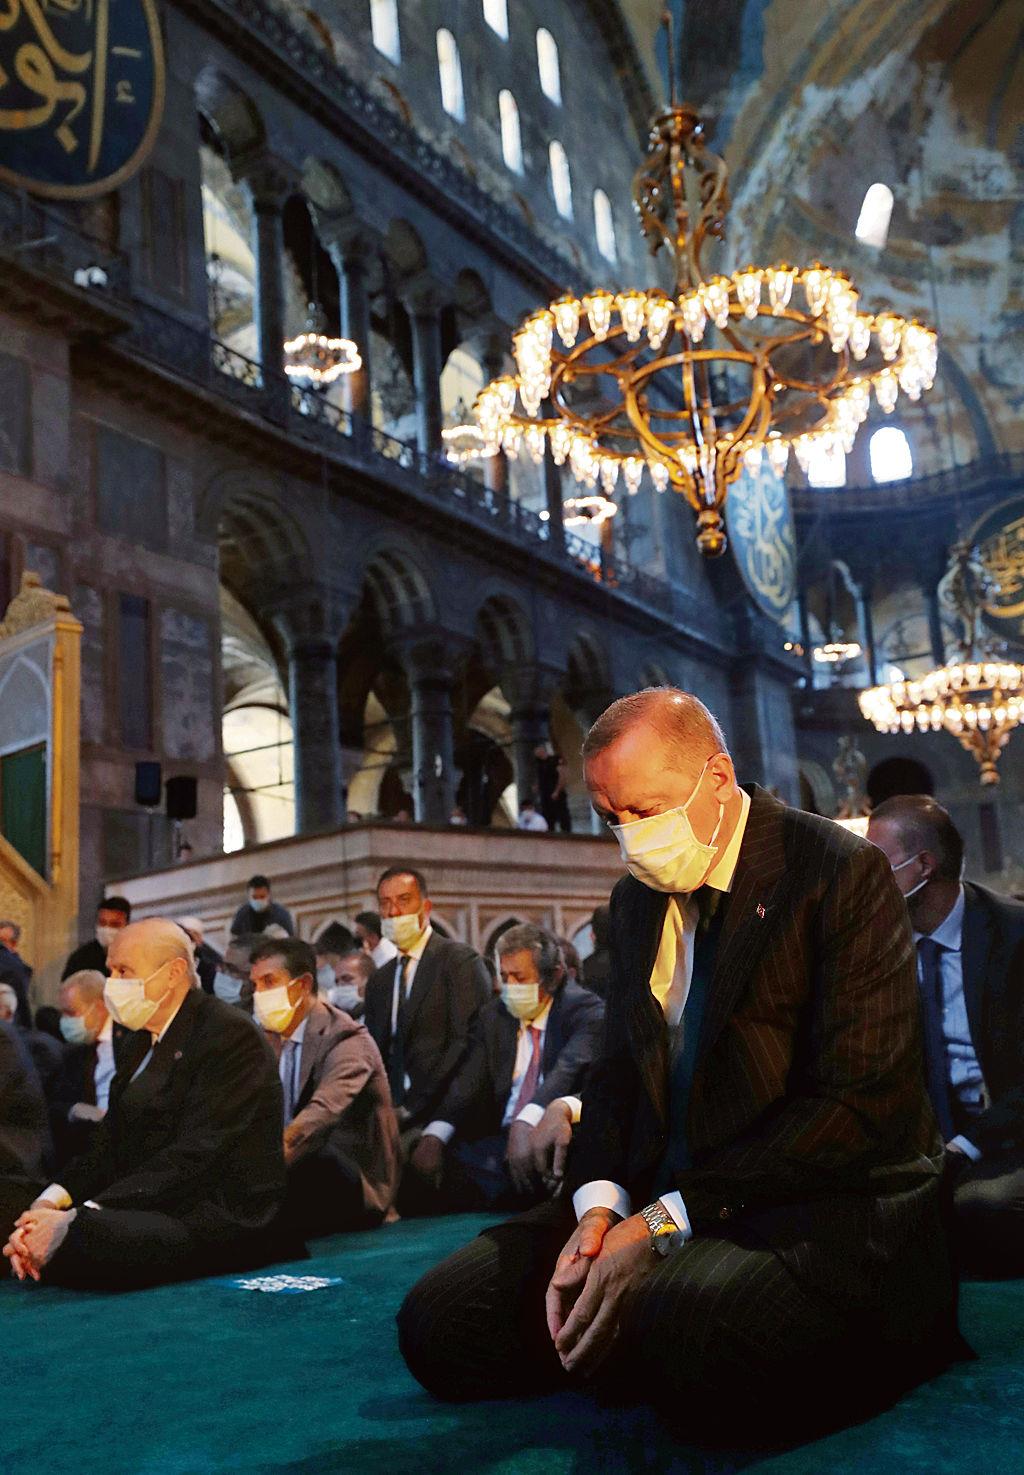 Turning Hagia Sofia into a mosque is a monumental mistake